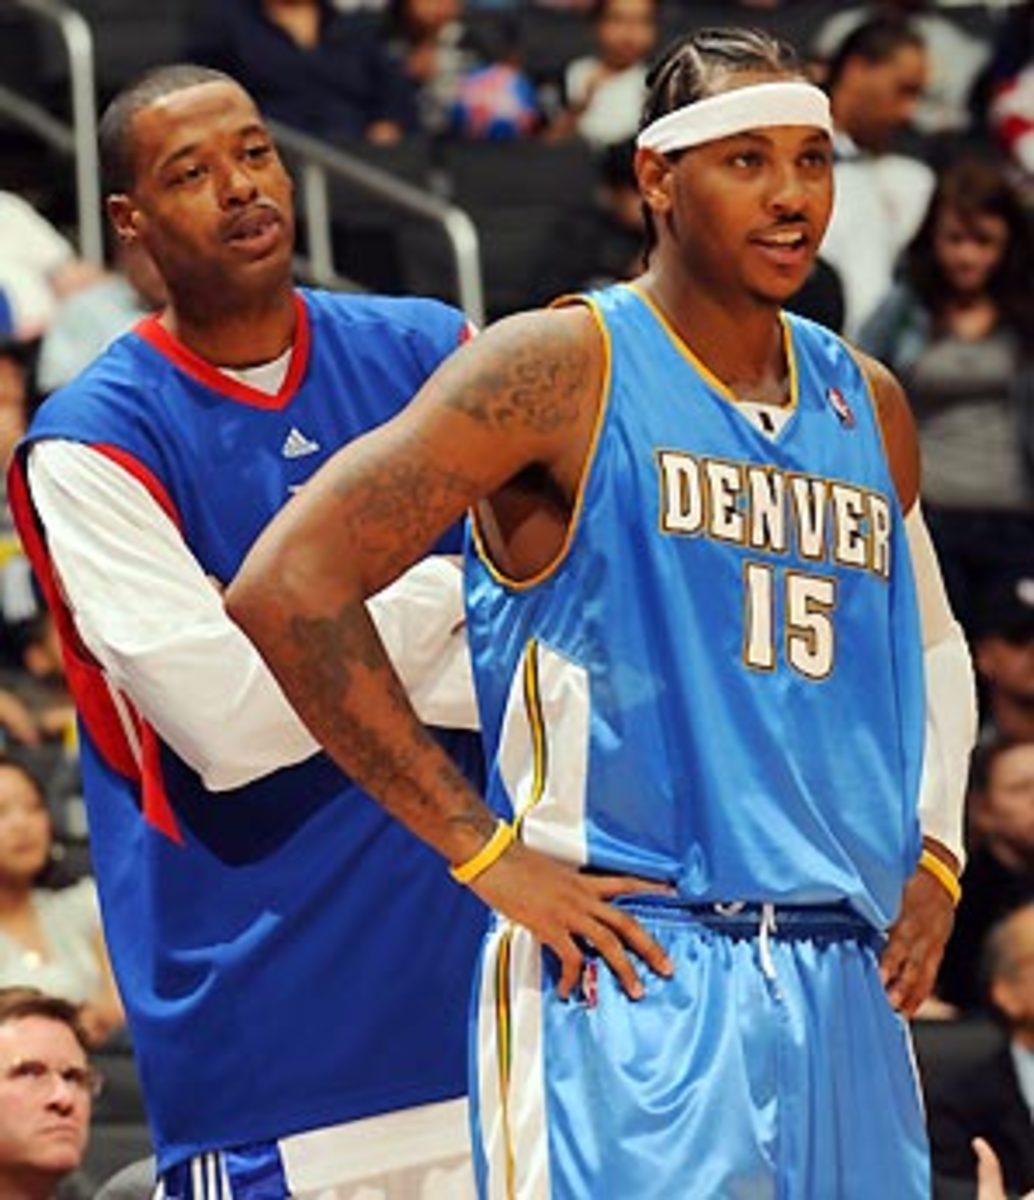 The West's Carmelo Anthony, left, and Kobe Bryant sit on the bench  during the 2010 NBA All-Star Game at Cowboys Stadium in Arlington, Texas,  Sunday, February 14, 2010. (Photo by Ron Jenkins/Fort